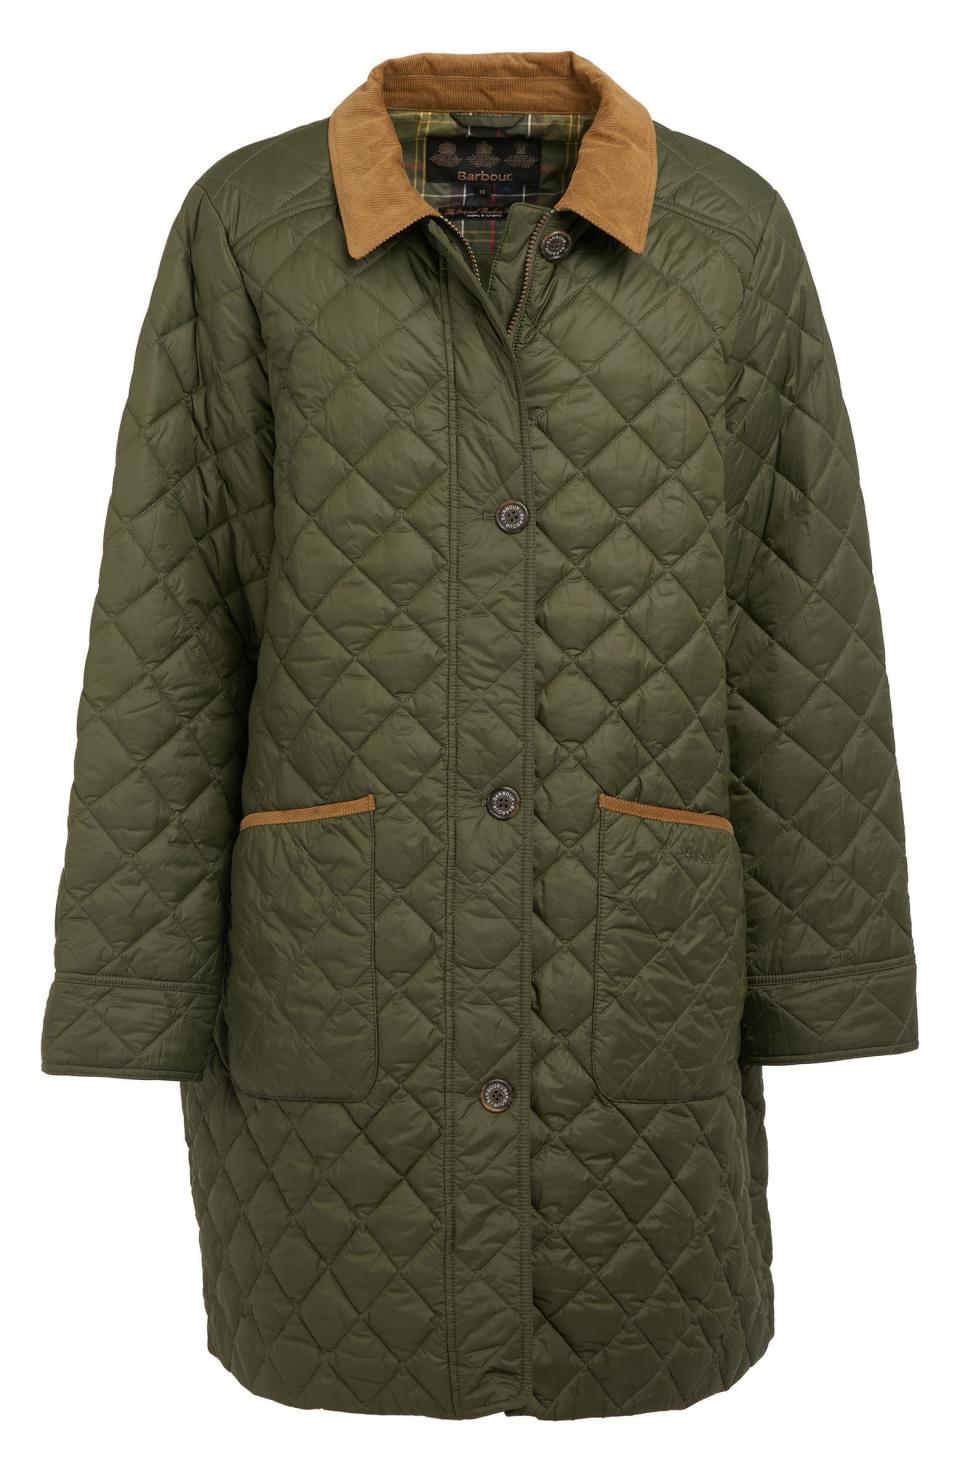 8) Hollingworth Quilted Jacket